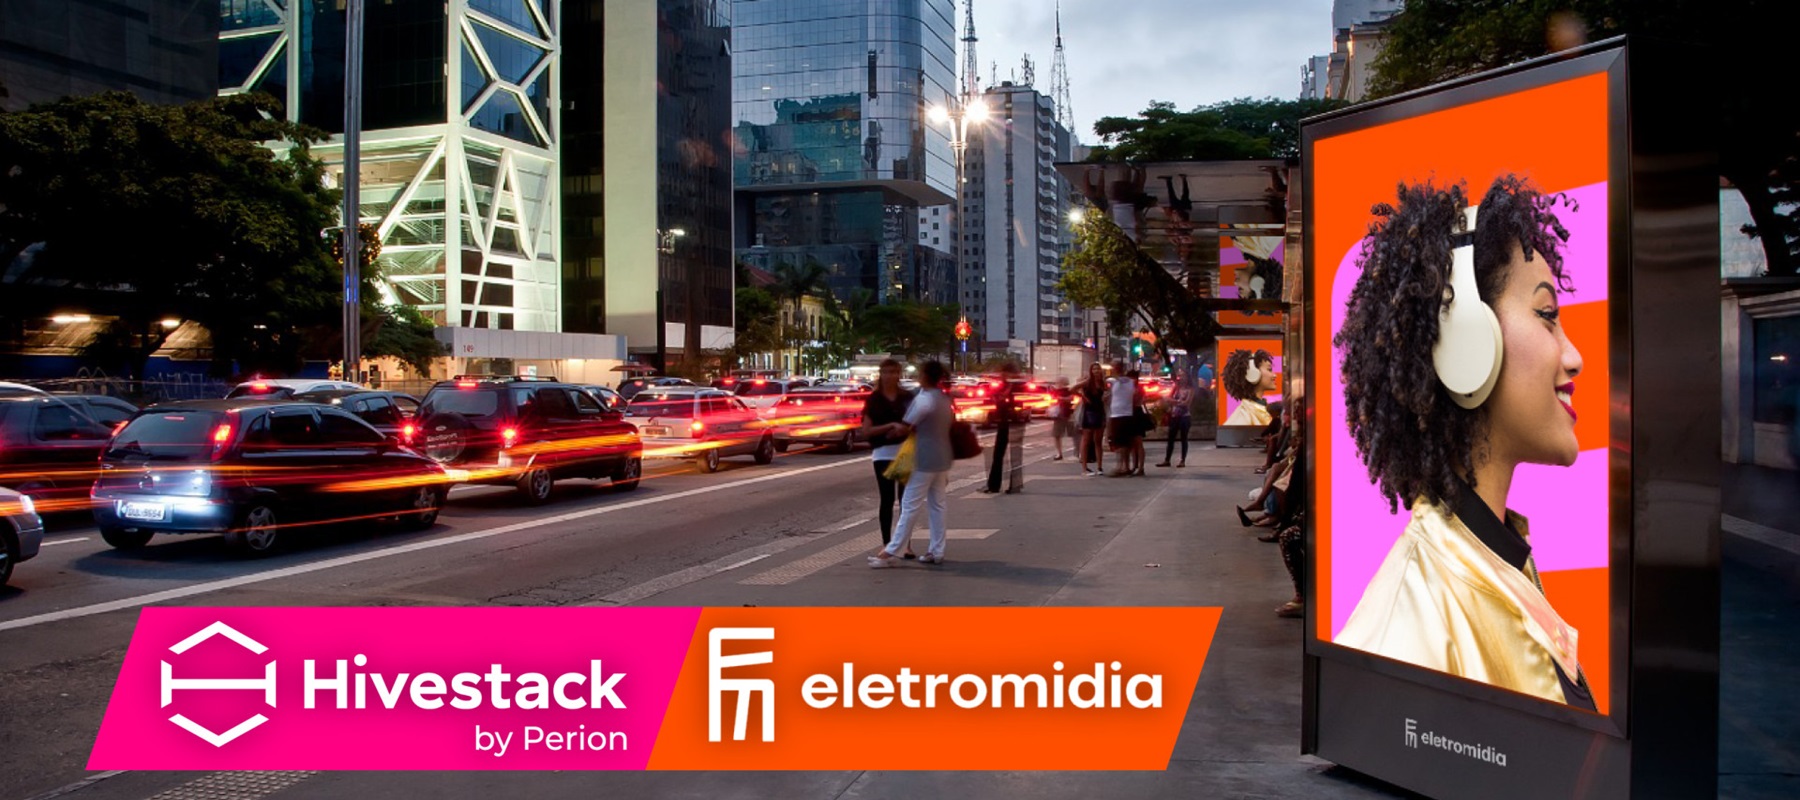 Hivestack by Perion partners with Eletromidia to integrate entire digital inventory across 46,000 screens in Brazil